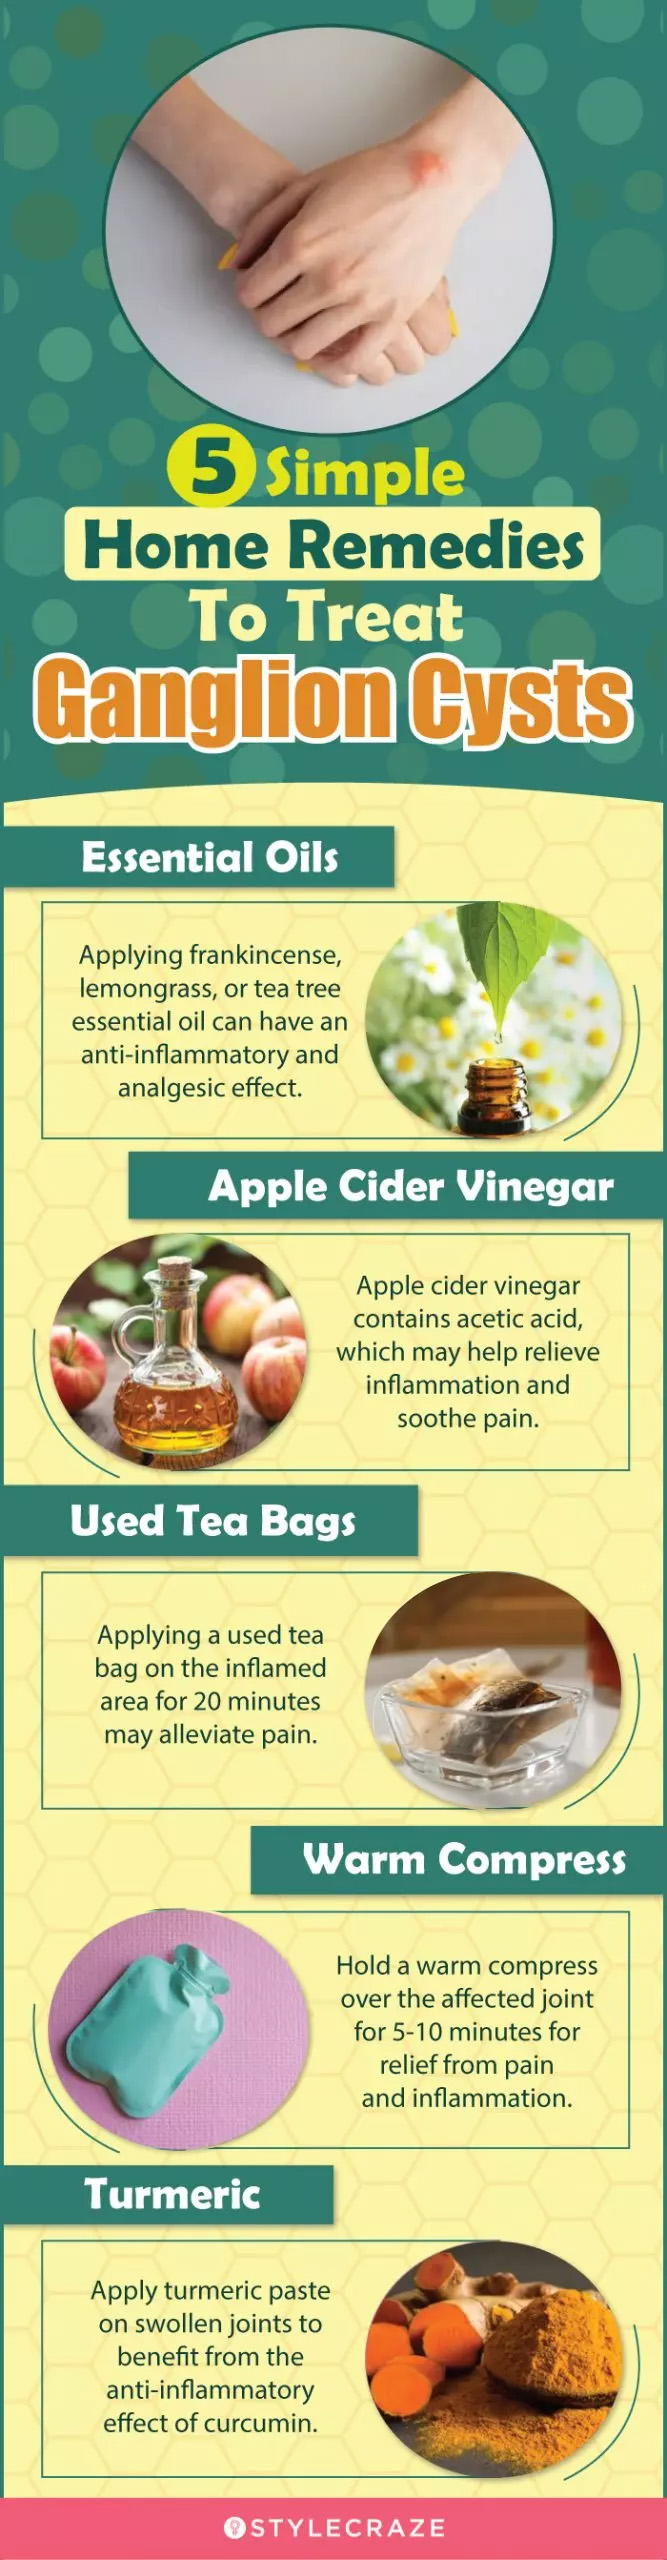 5 simple home remedies to treat ganglion cysts (infographic)